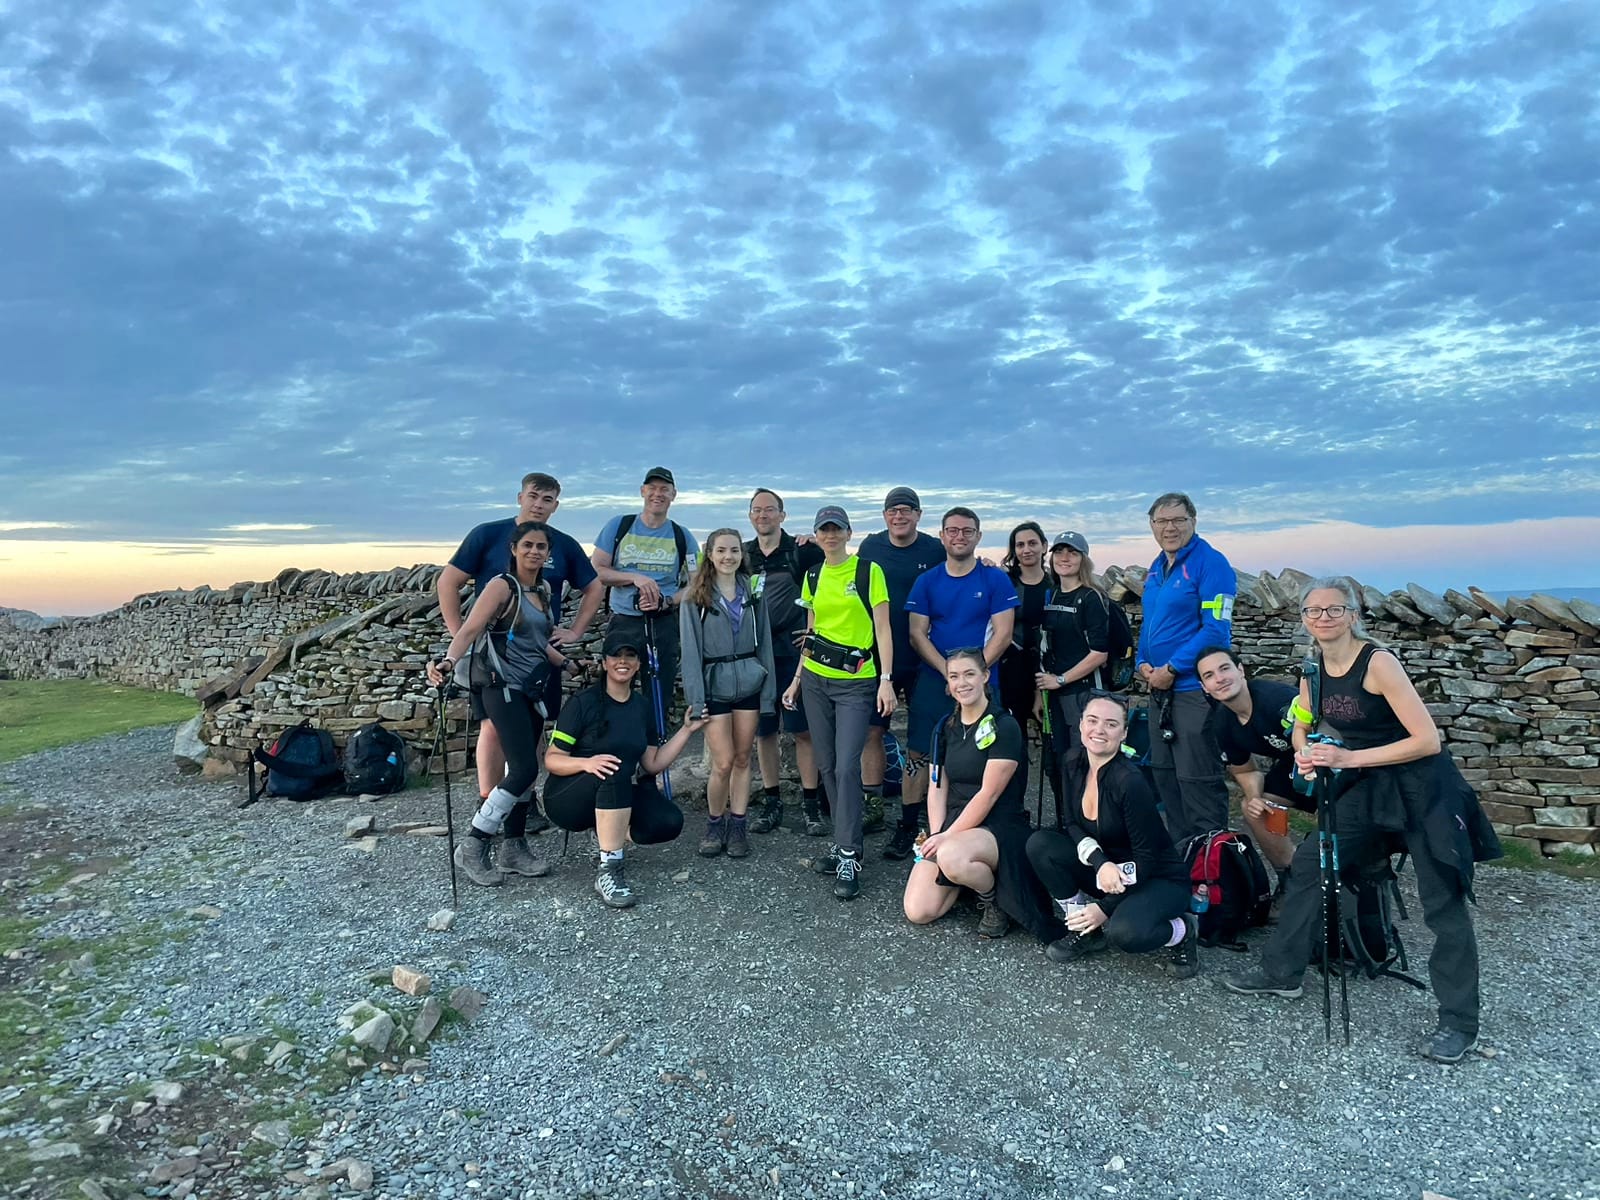 Paragon Banking Group’s ‘The Peaky Climbers’ raises over £8,000 for Newlife  with Three Peaks Challenge